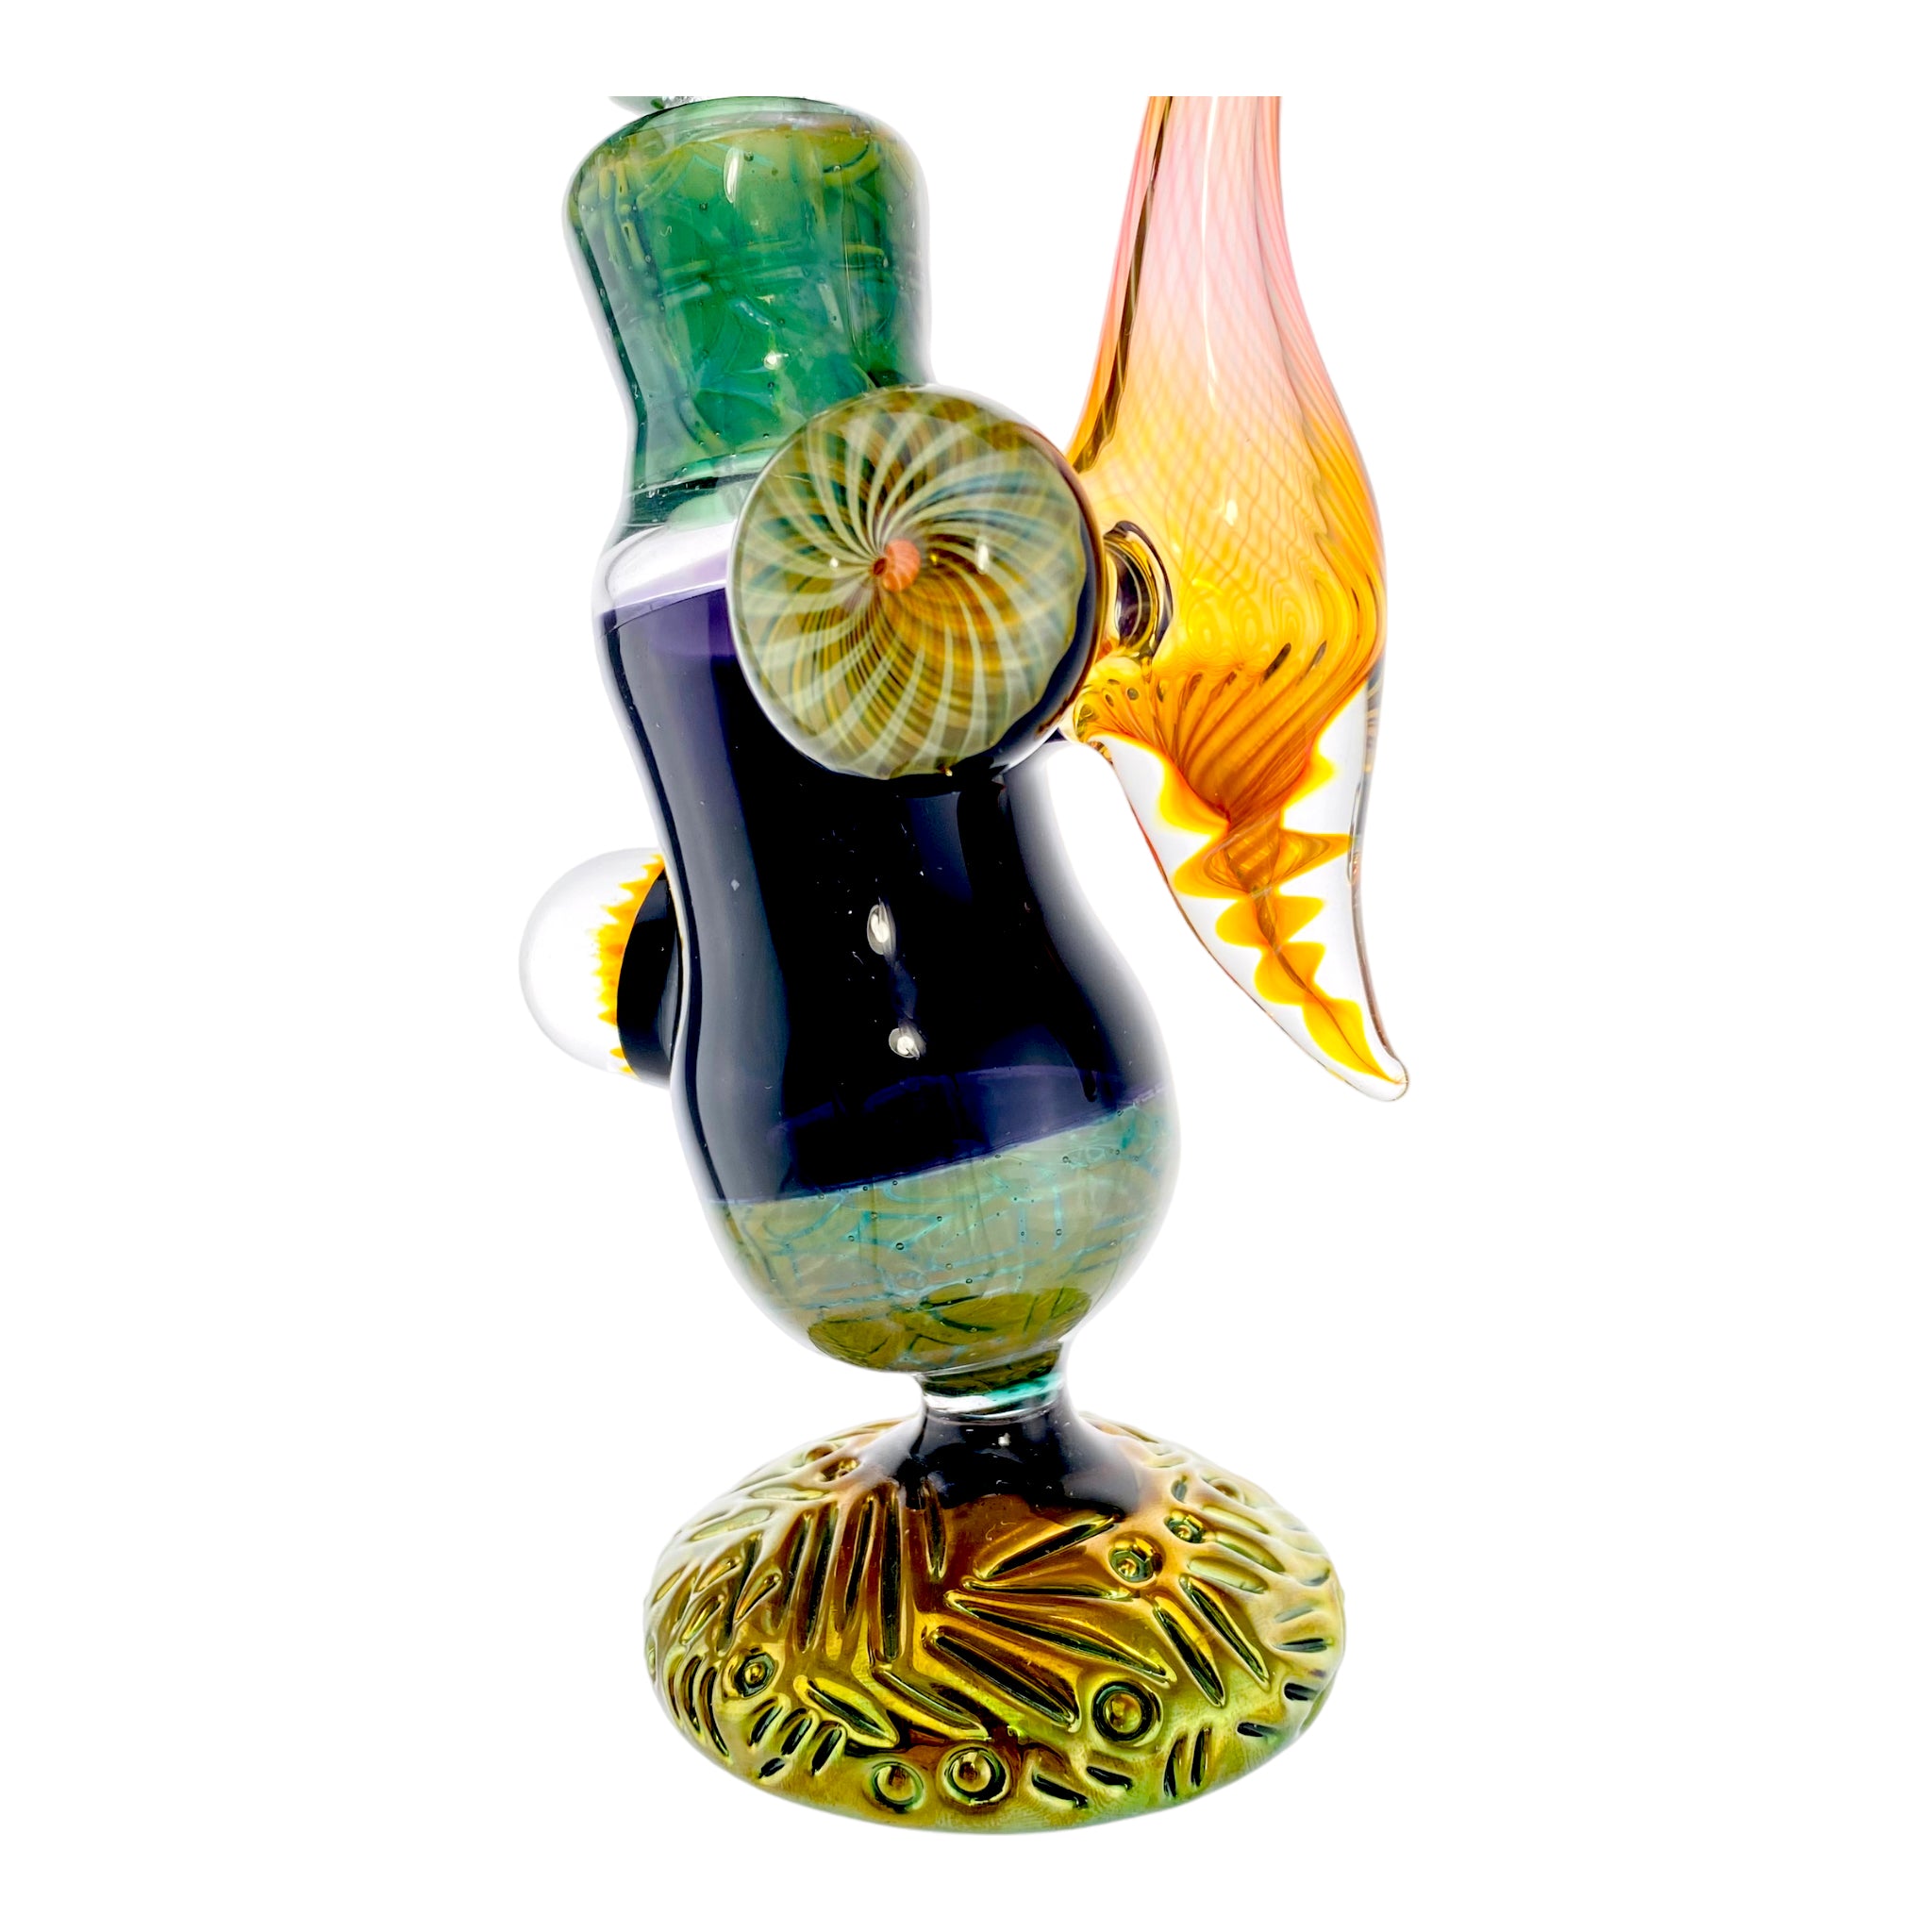 Seth B Glass - Stand Up Dab Rig With Opal And Implosion Marbles